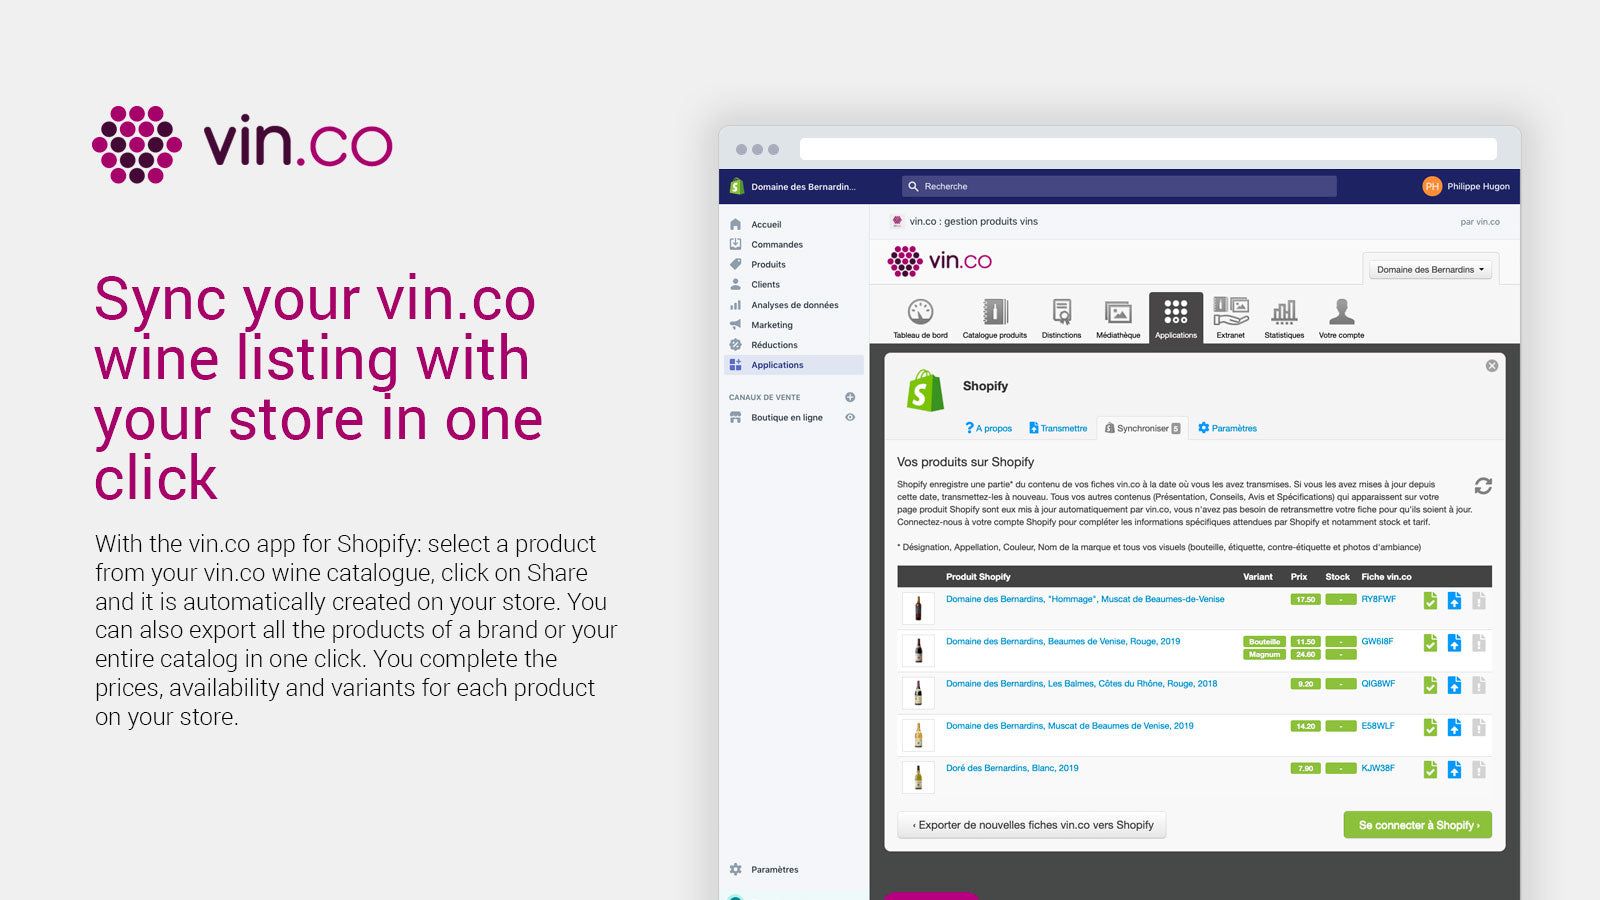 Sync your vin.co wine listing with your store in one click